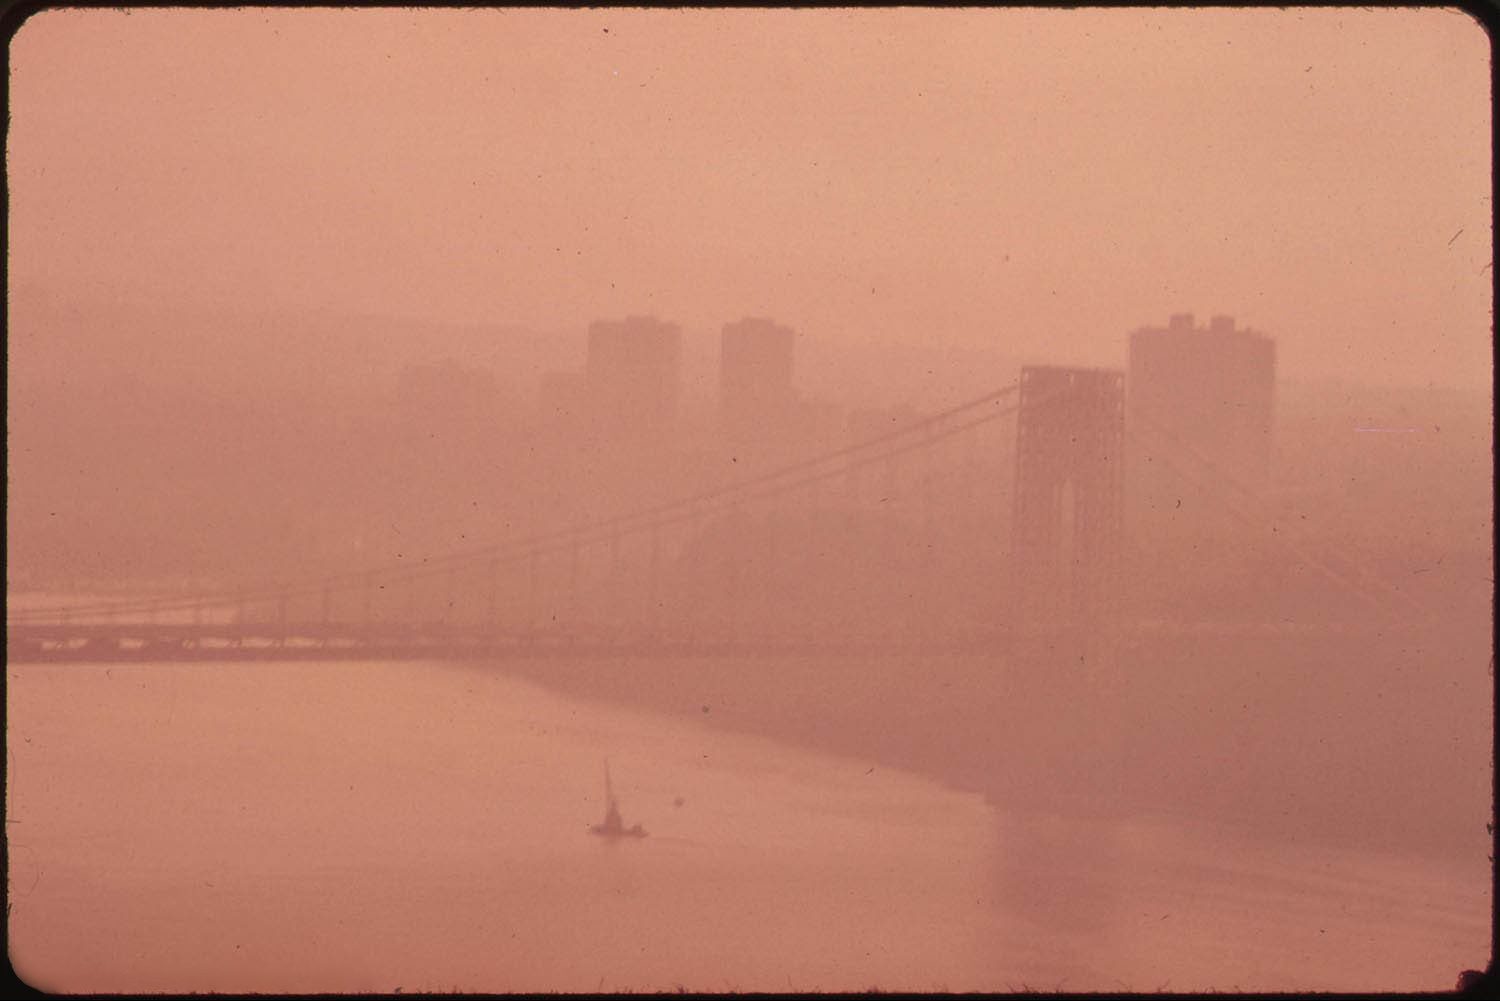 NYC 1970s pollution